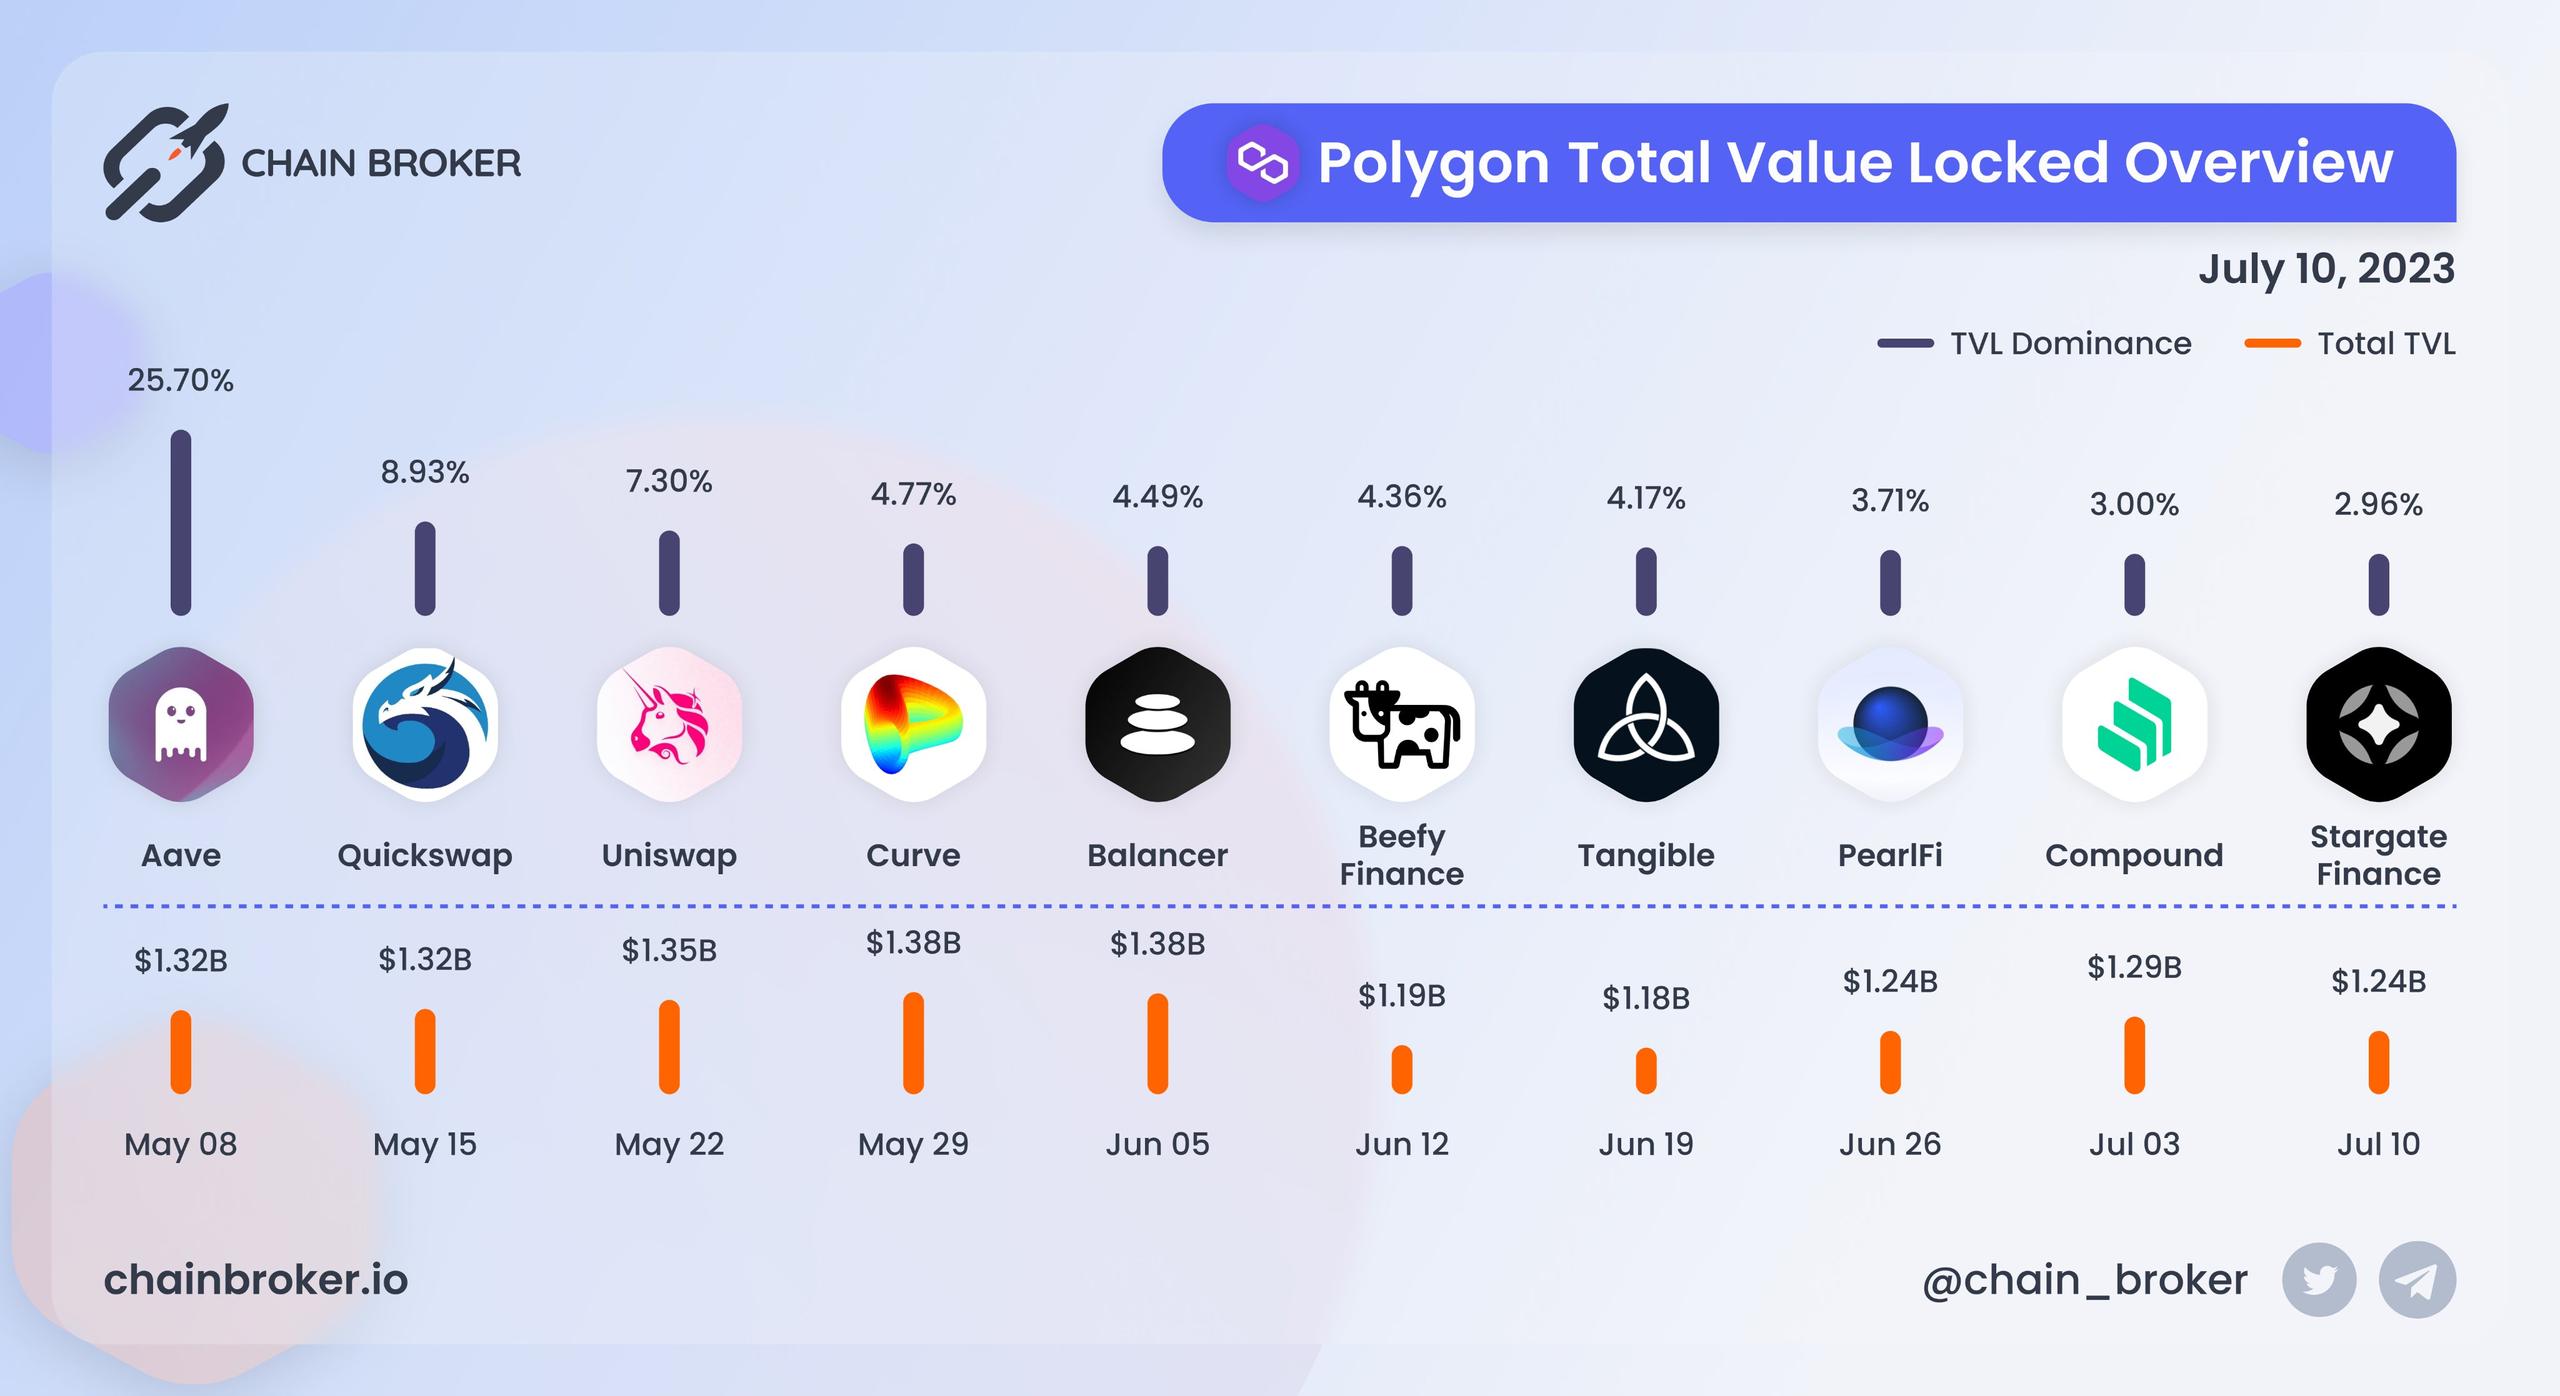 Polygon total value locked overview